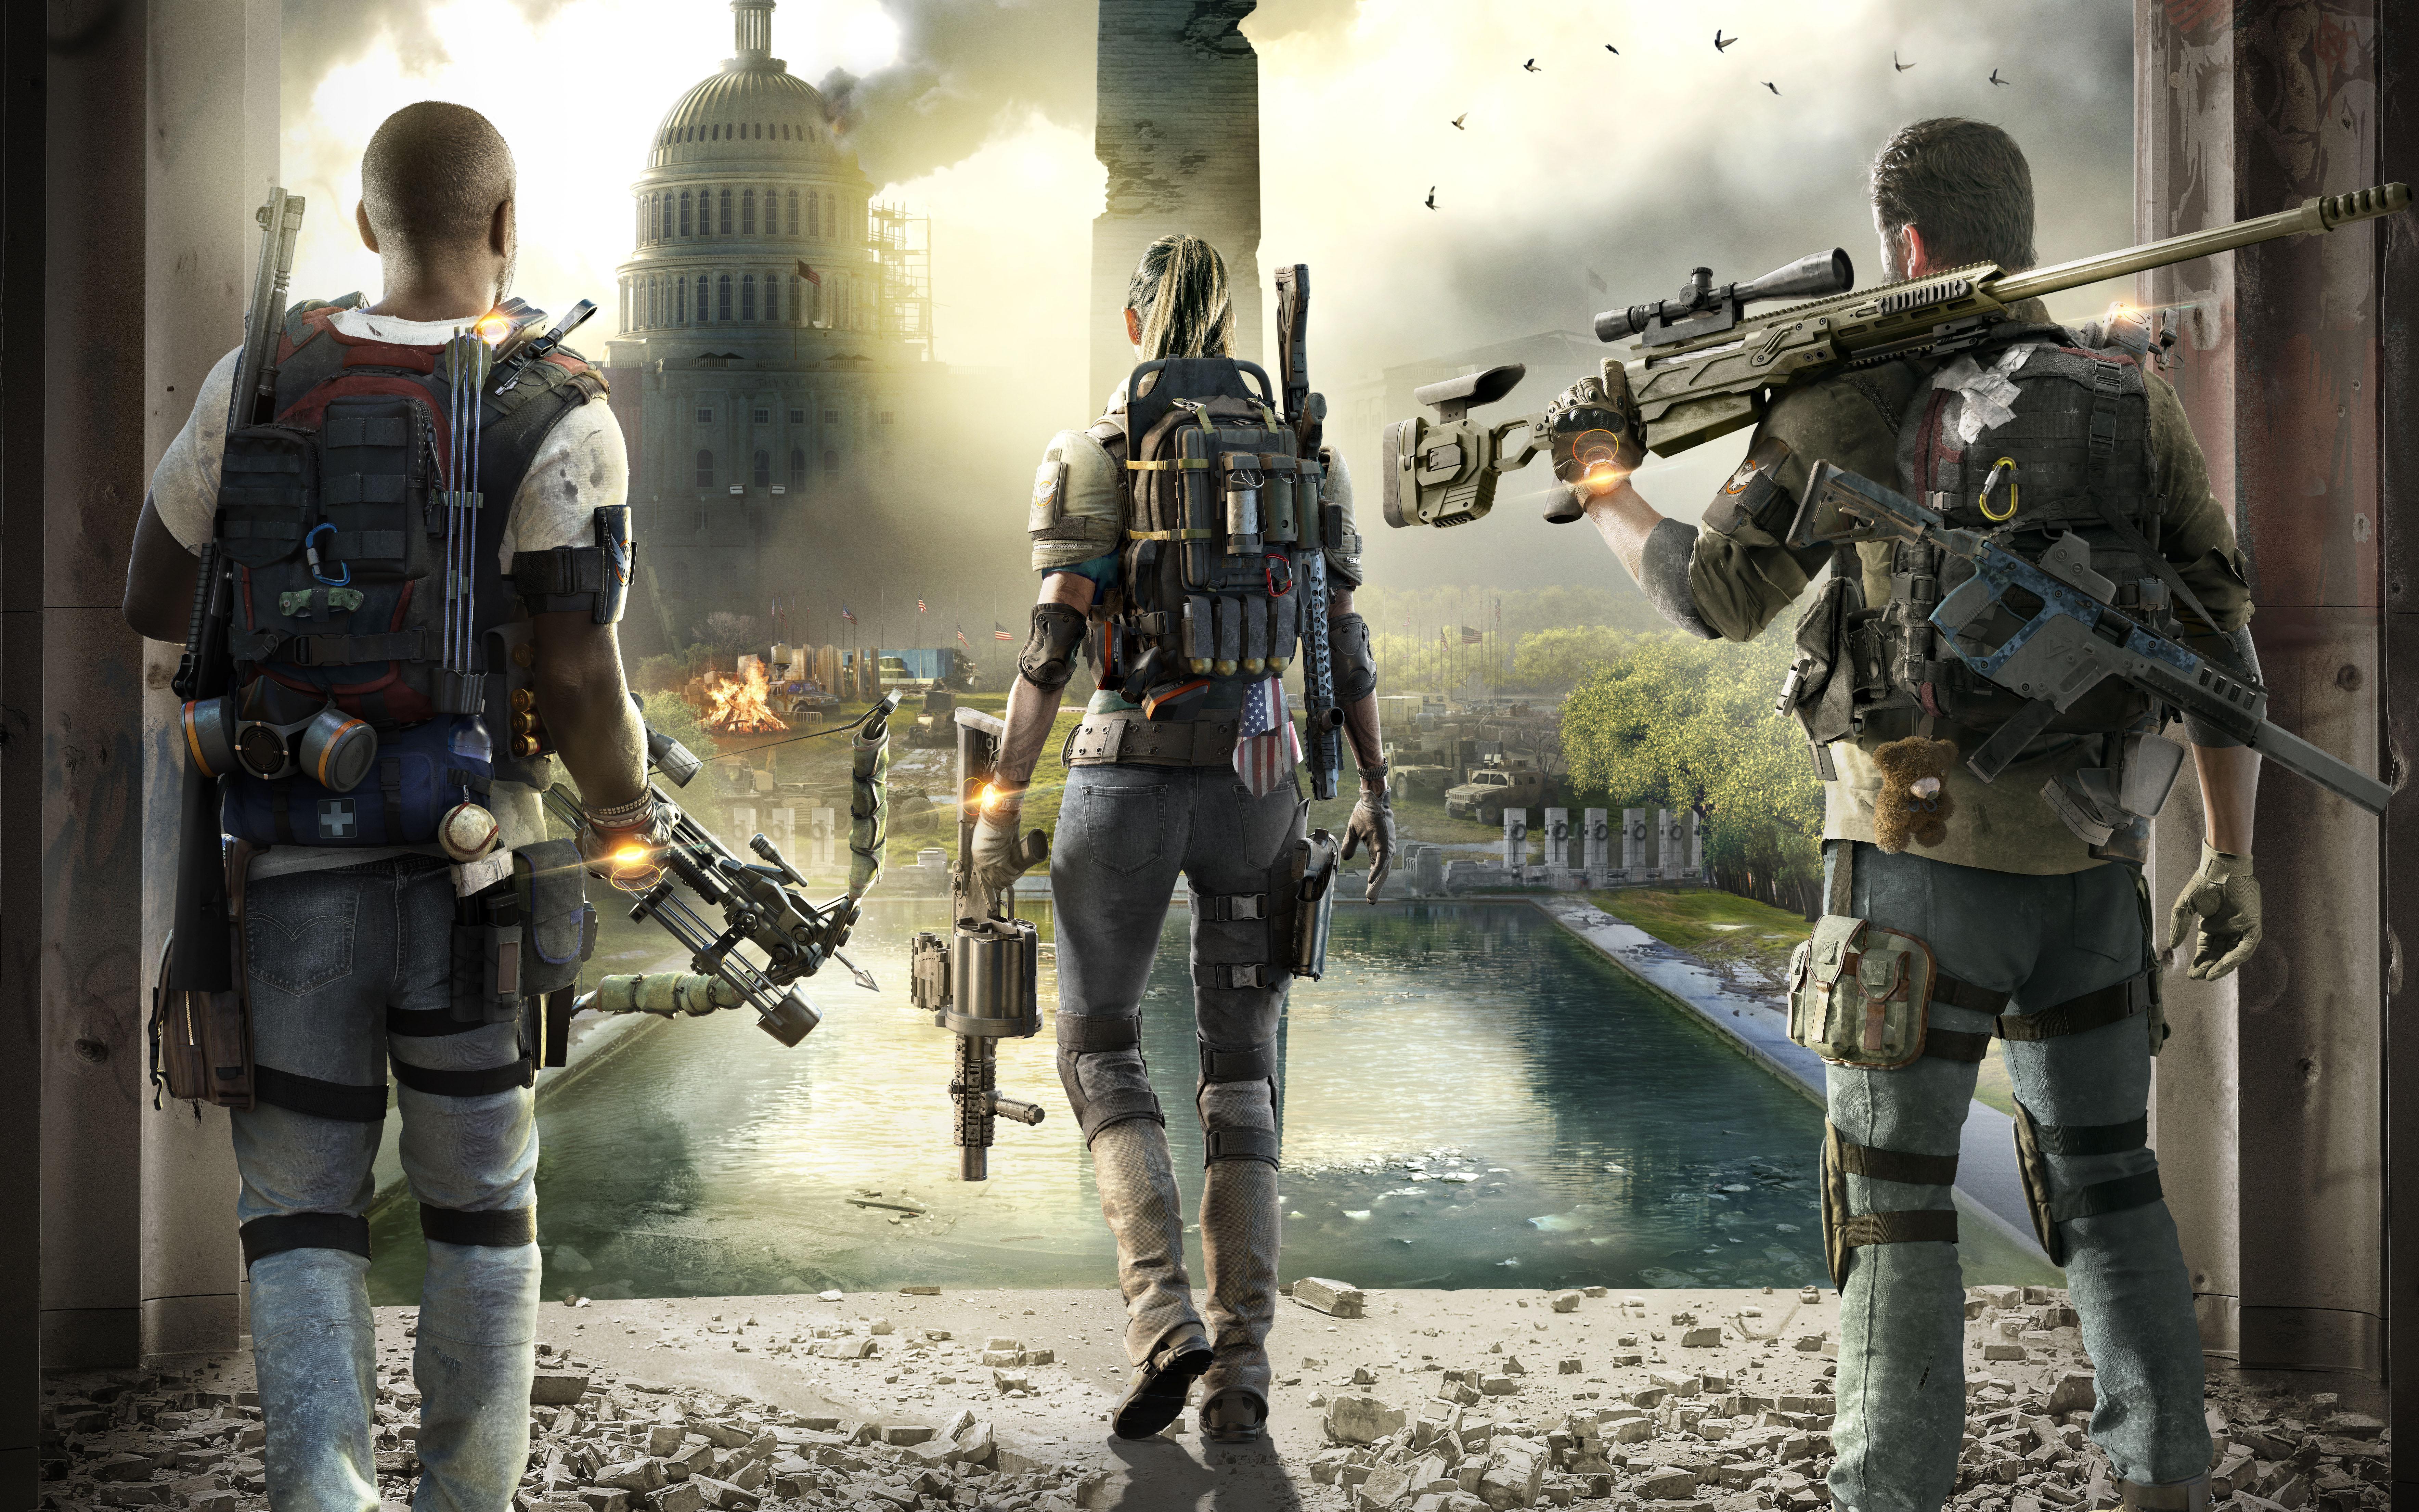 Tom Clancy's The Division 2 Wallpaper